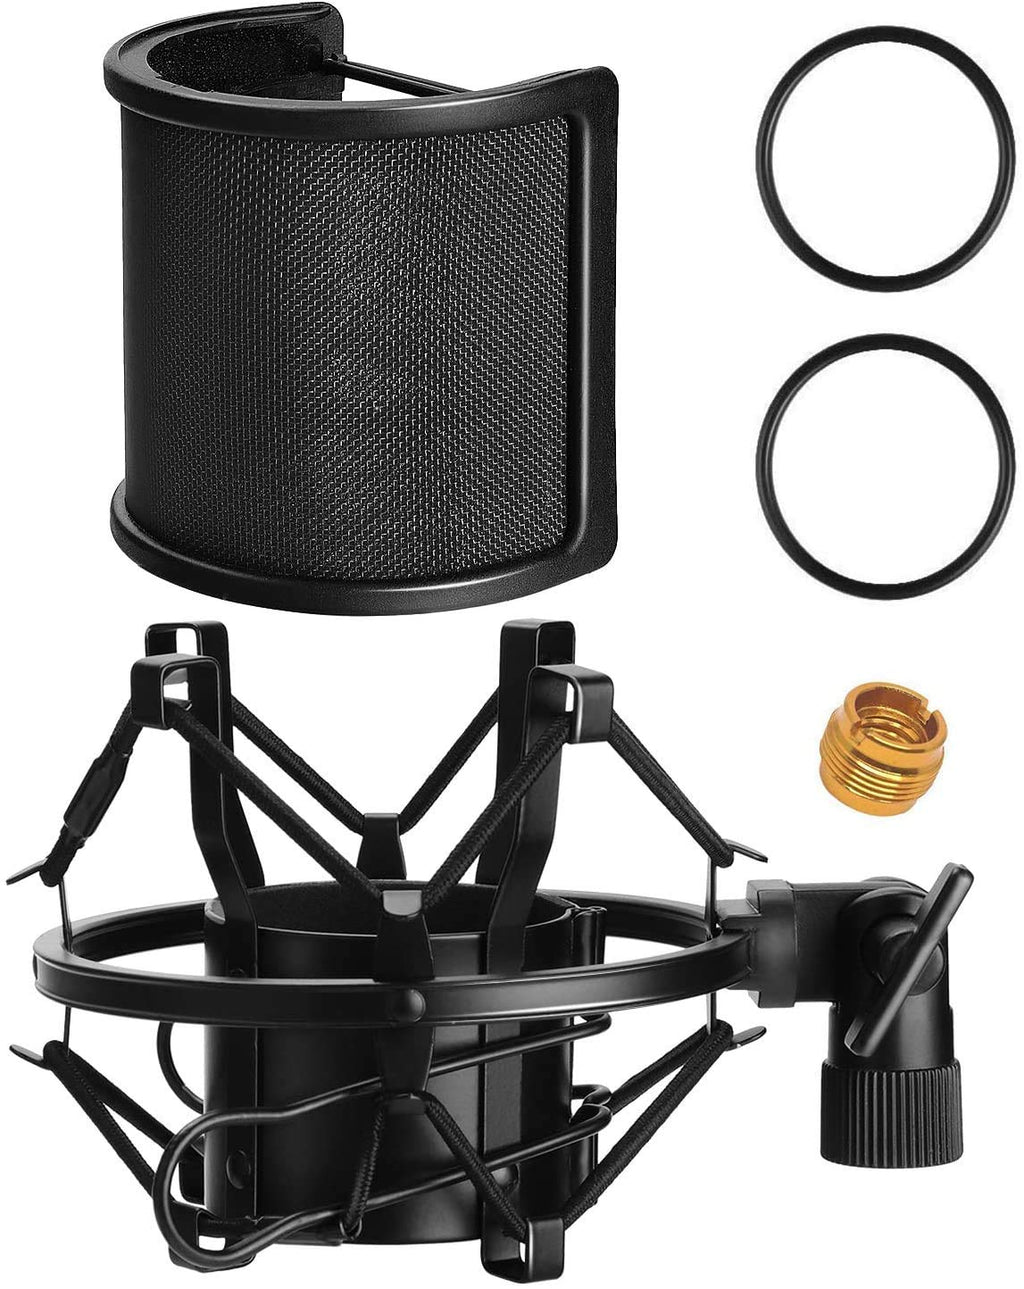 [AUSTRALIA] - AT2020 Microphone Shock Mount with Pop Filter, PEMOTech Universal Shock Mount for 46mm-53mm Diameter Mic compatible for AT2020 Anti-Vibration Suspension Microphone Shock Mount Bonus Screw Adapter 